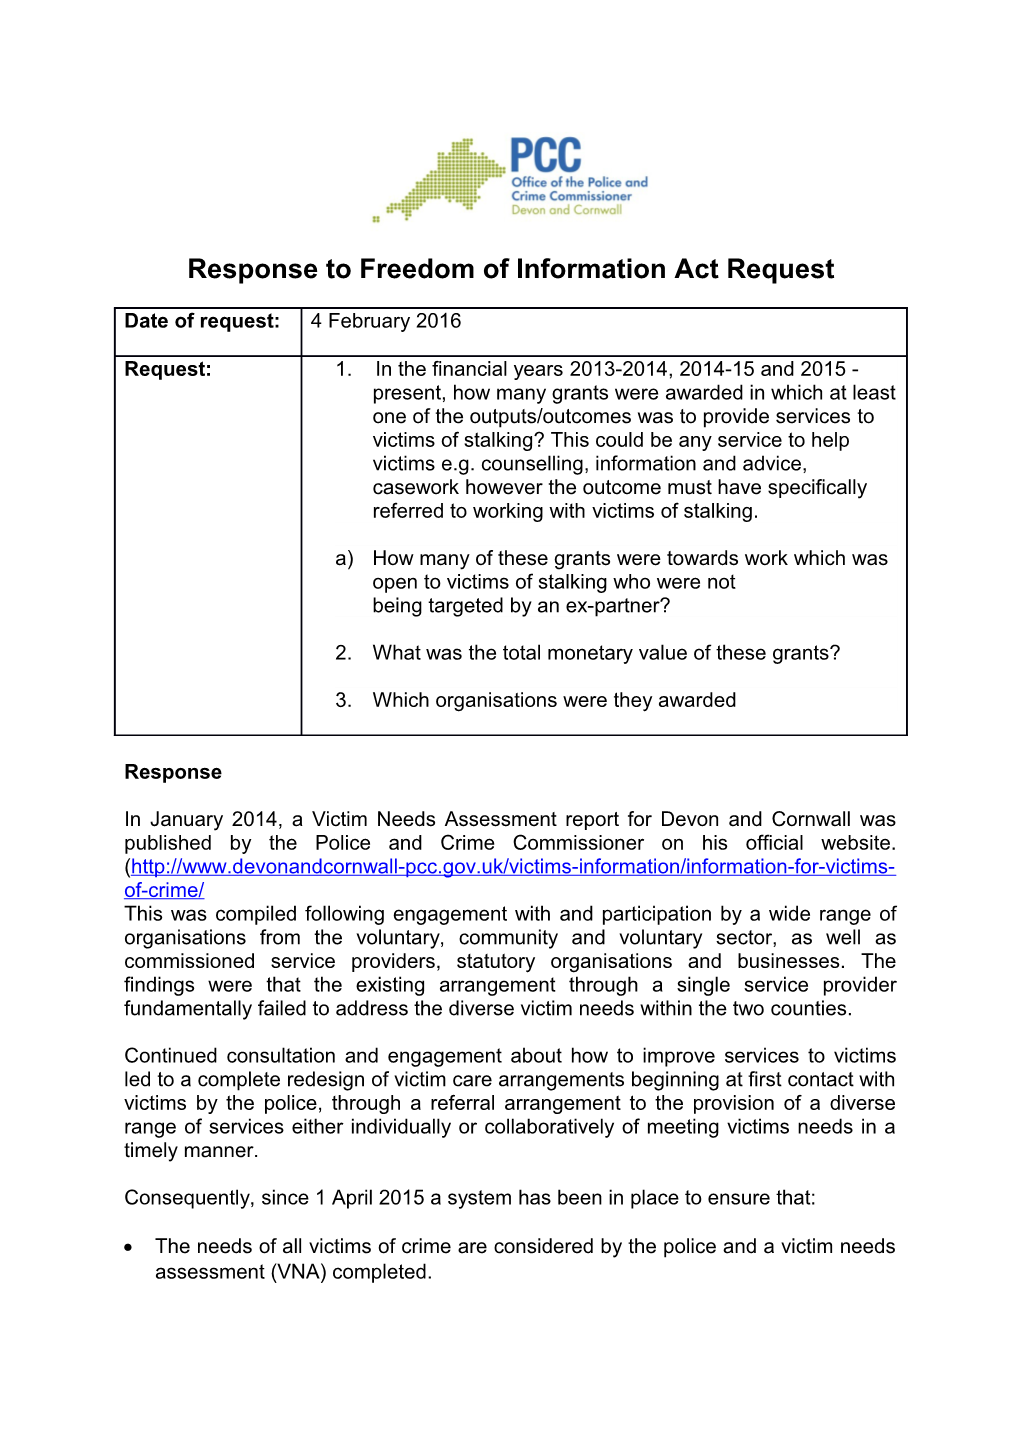 Response to Freedom of Information Act Request